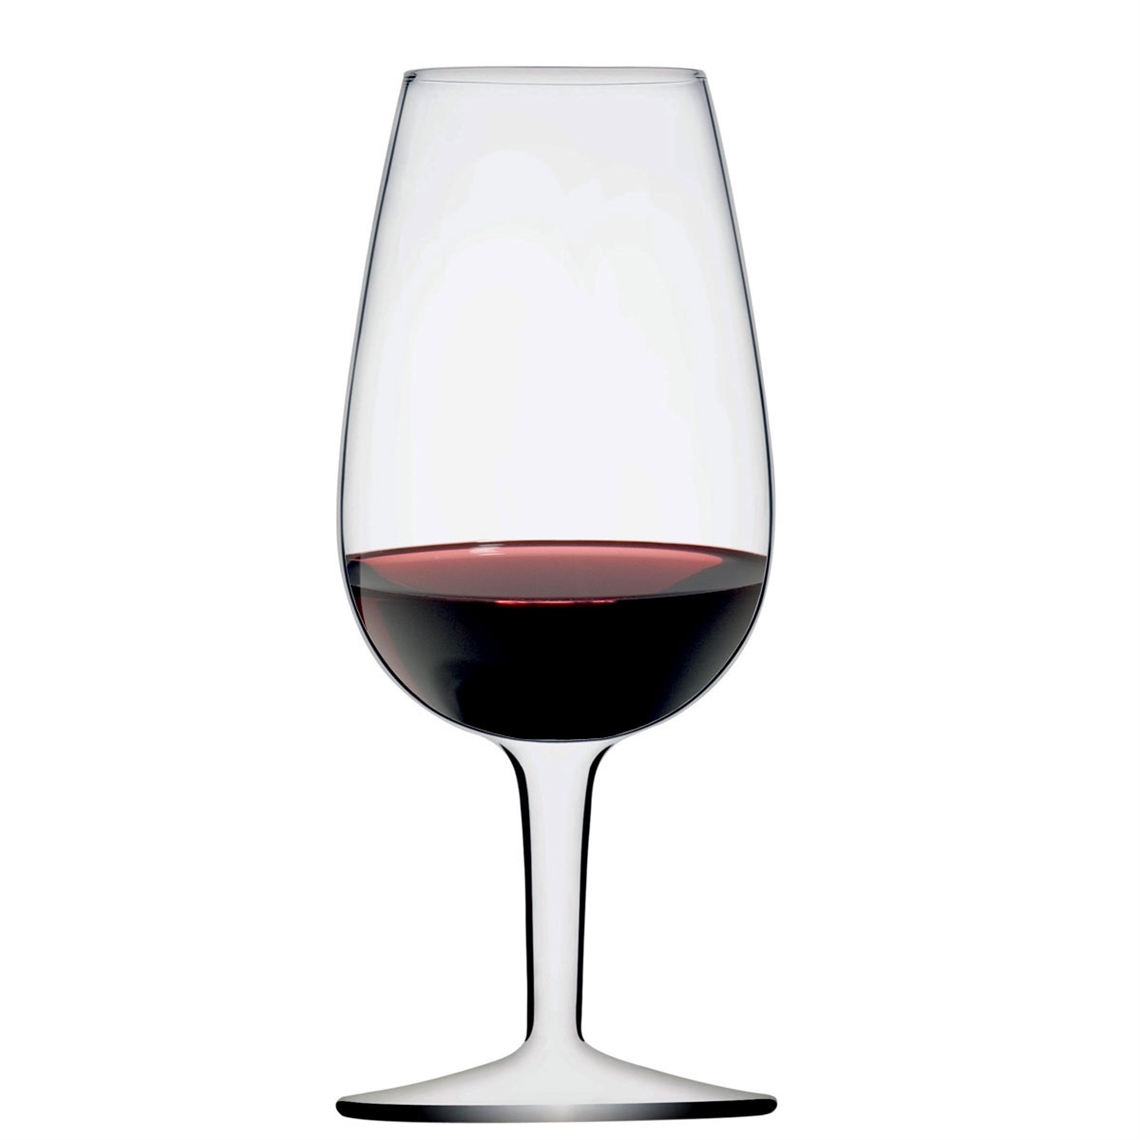 View more what questions you should ask at a wine tasting party from our Wine Tasting Glasses range